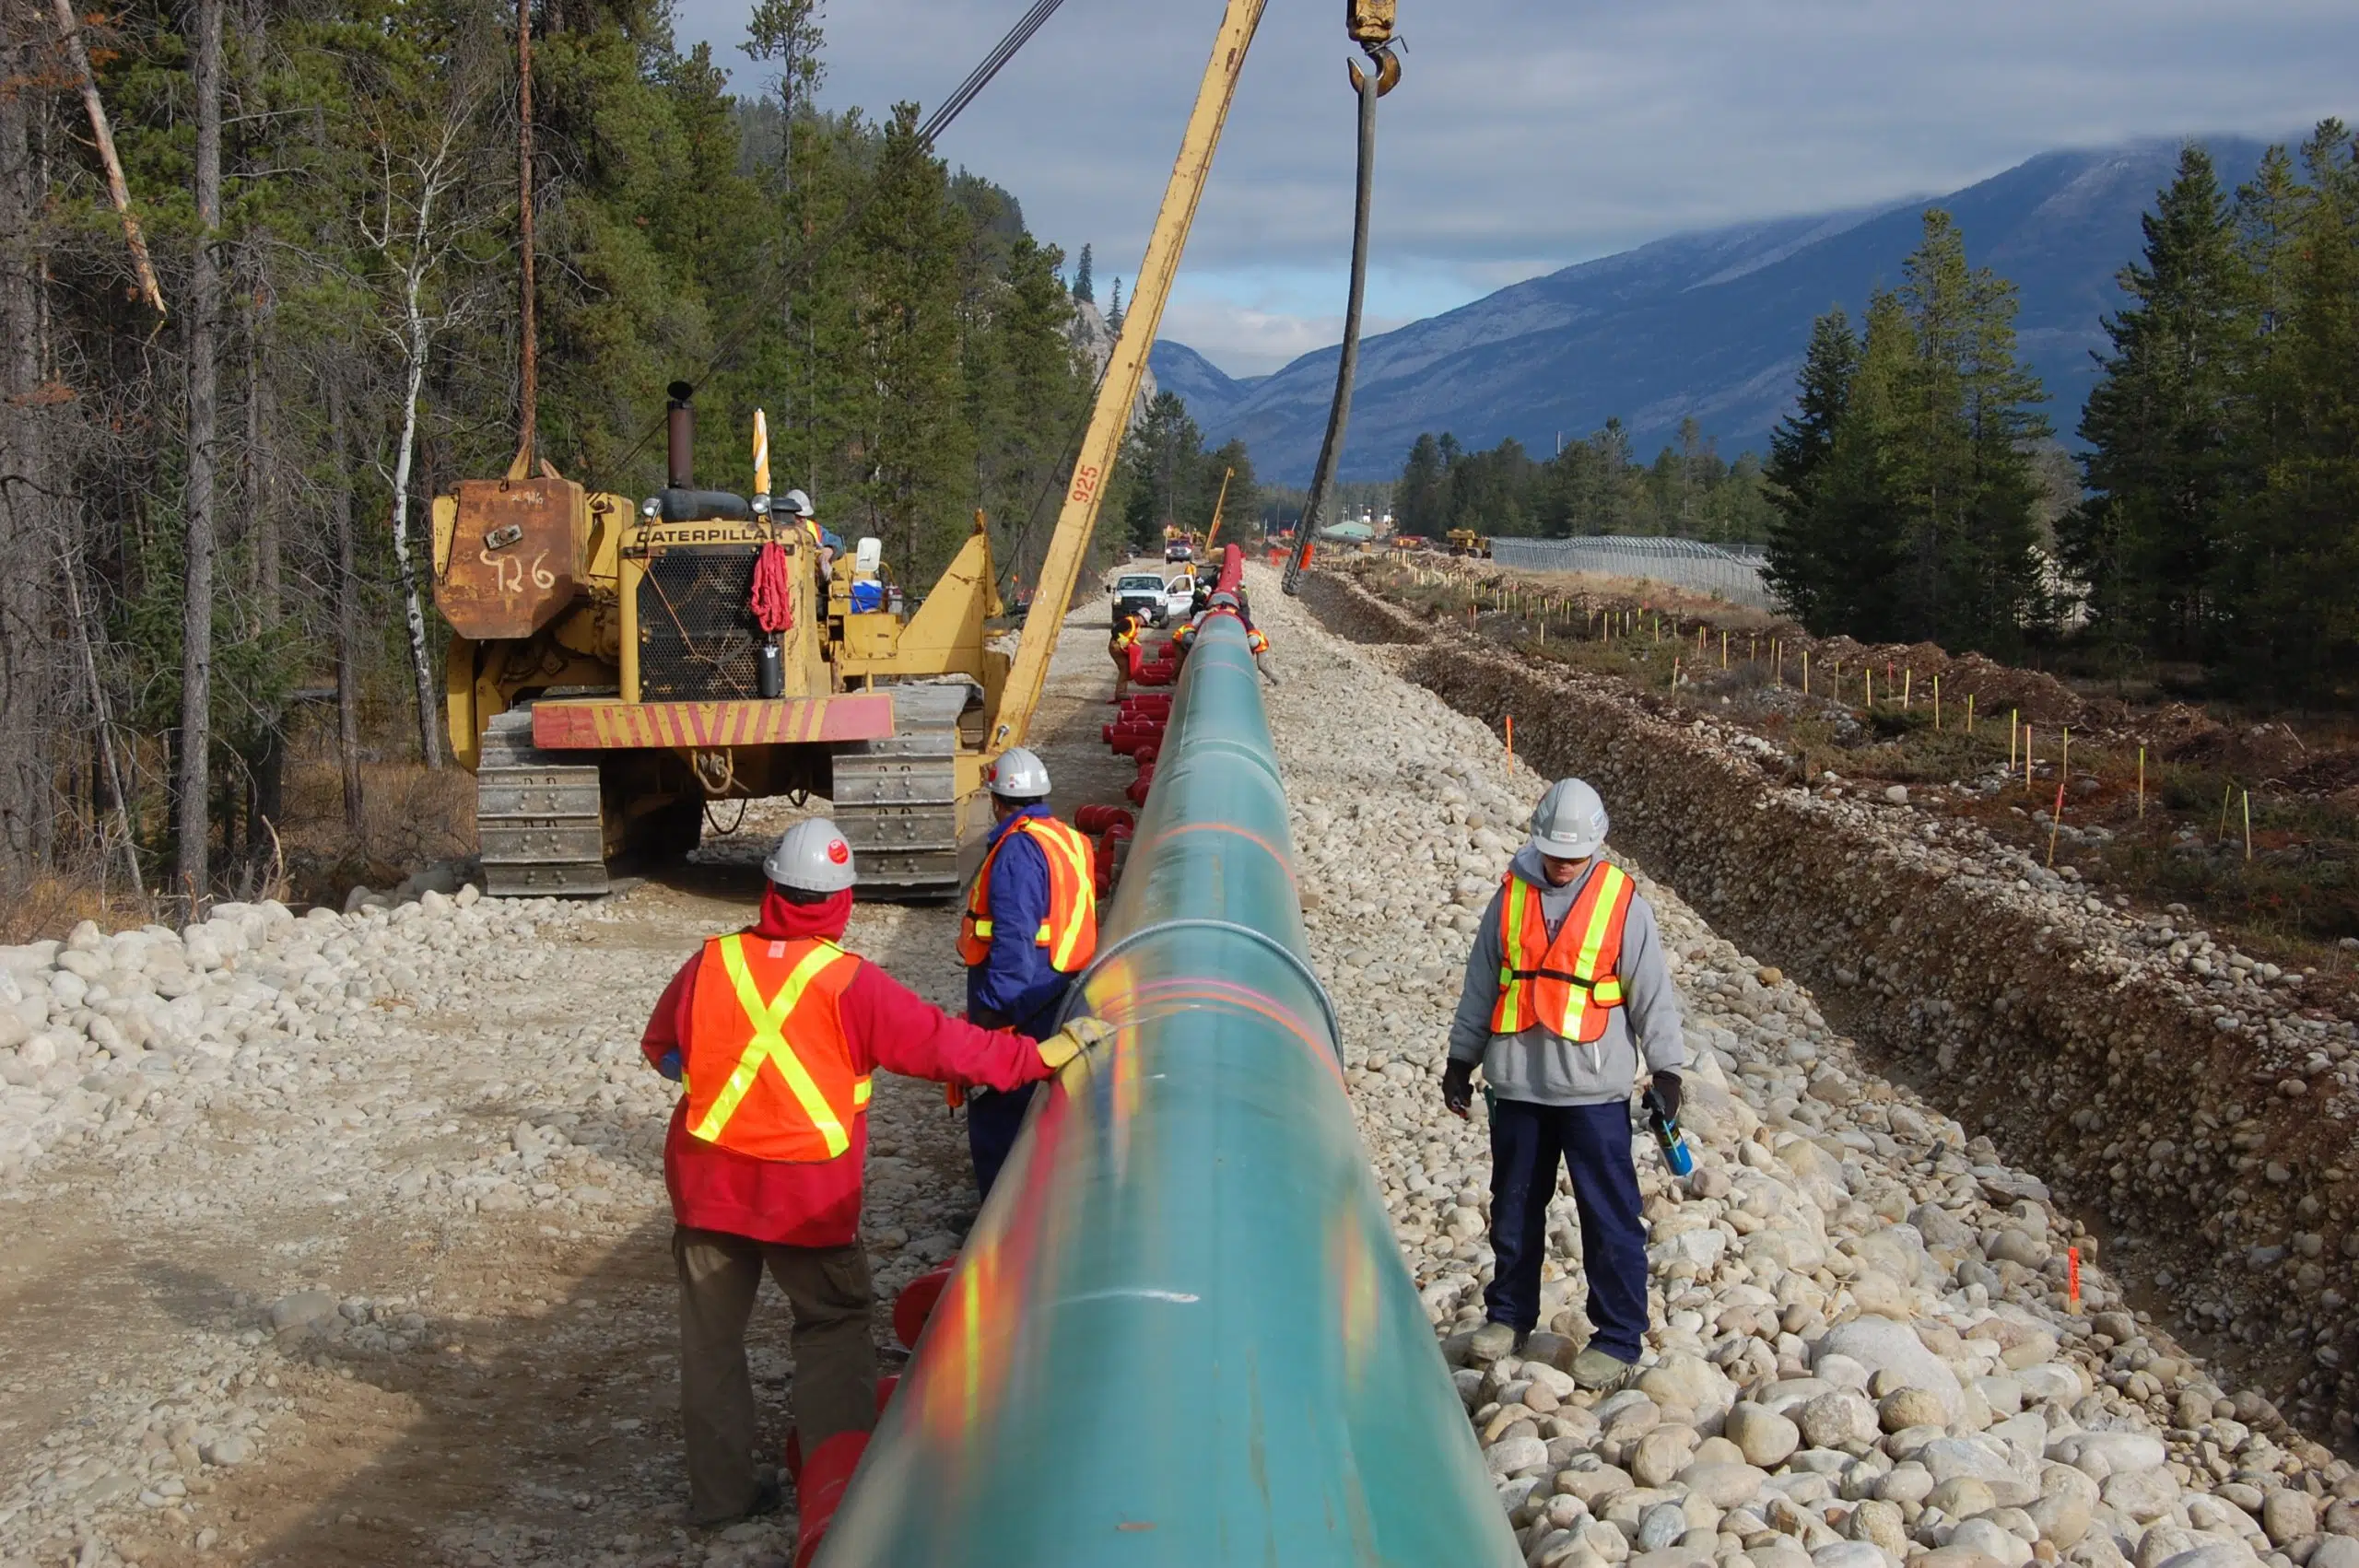 Trans Mountain boss says pipeline worksites will have strict COVID-19 safety protocols